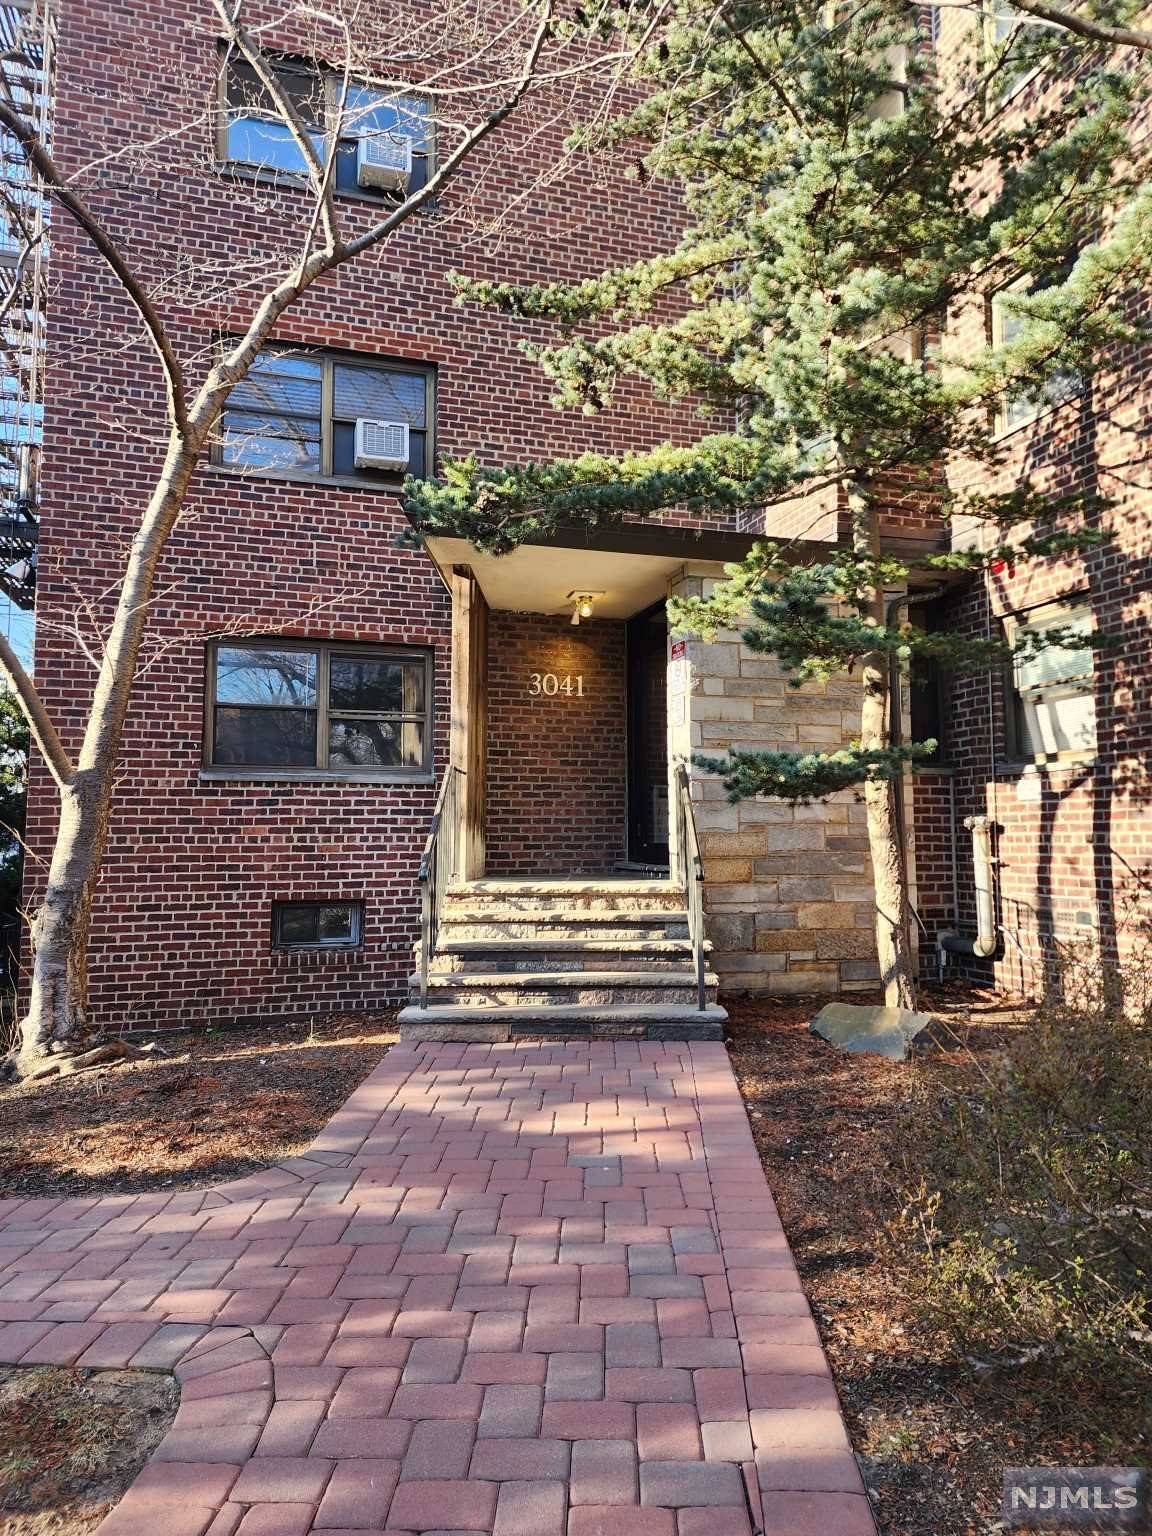 MLS Number 23004030 - 0 bed,1 bath, Condo/Coop/Townhouse Property for  $100,000 - 3041 Edwin Avenue, Unit 1H, Fort Lee, NJ - New Jersey Multiple  Listing Service